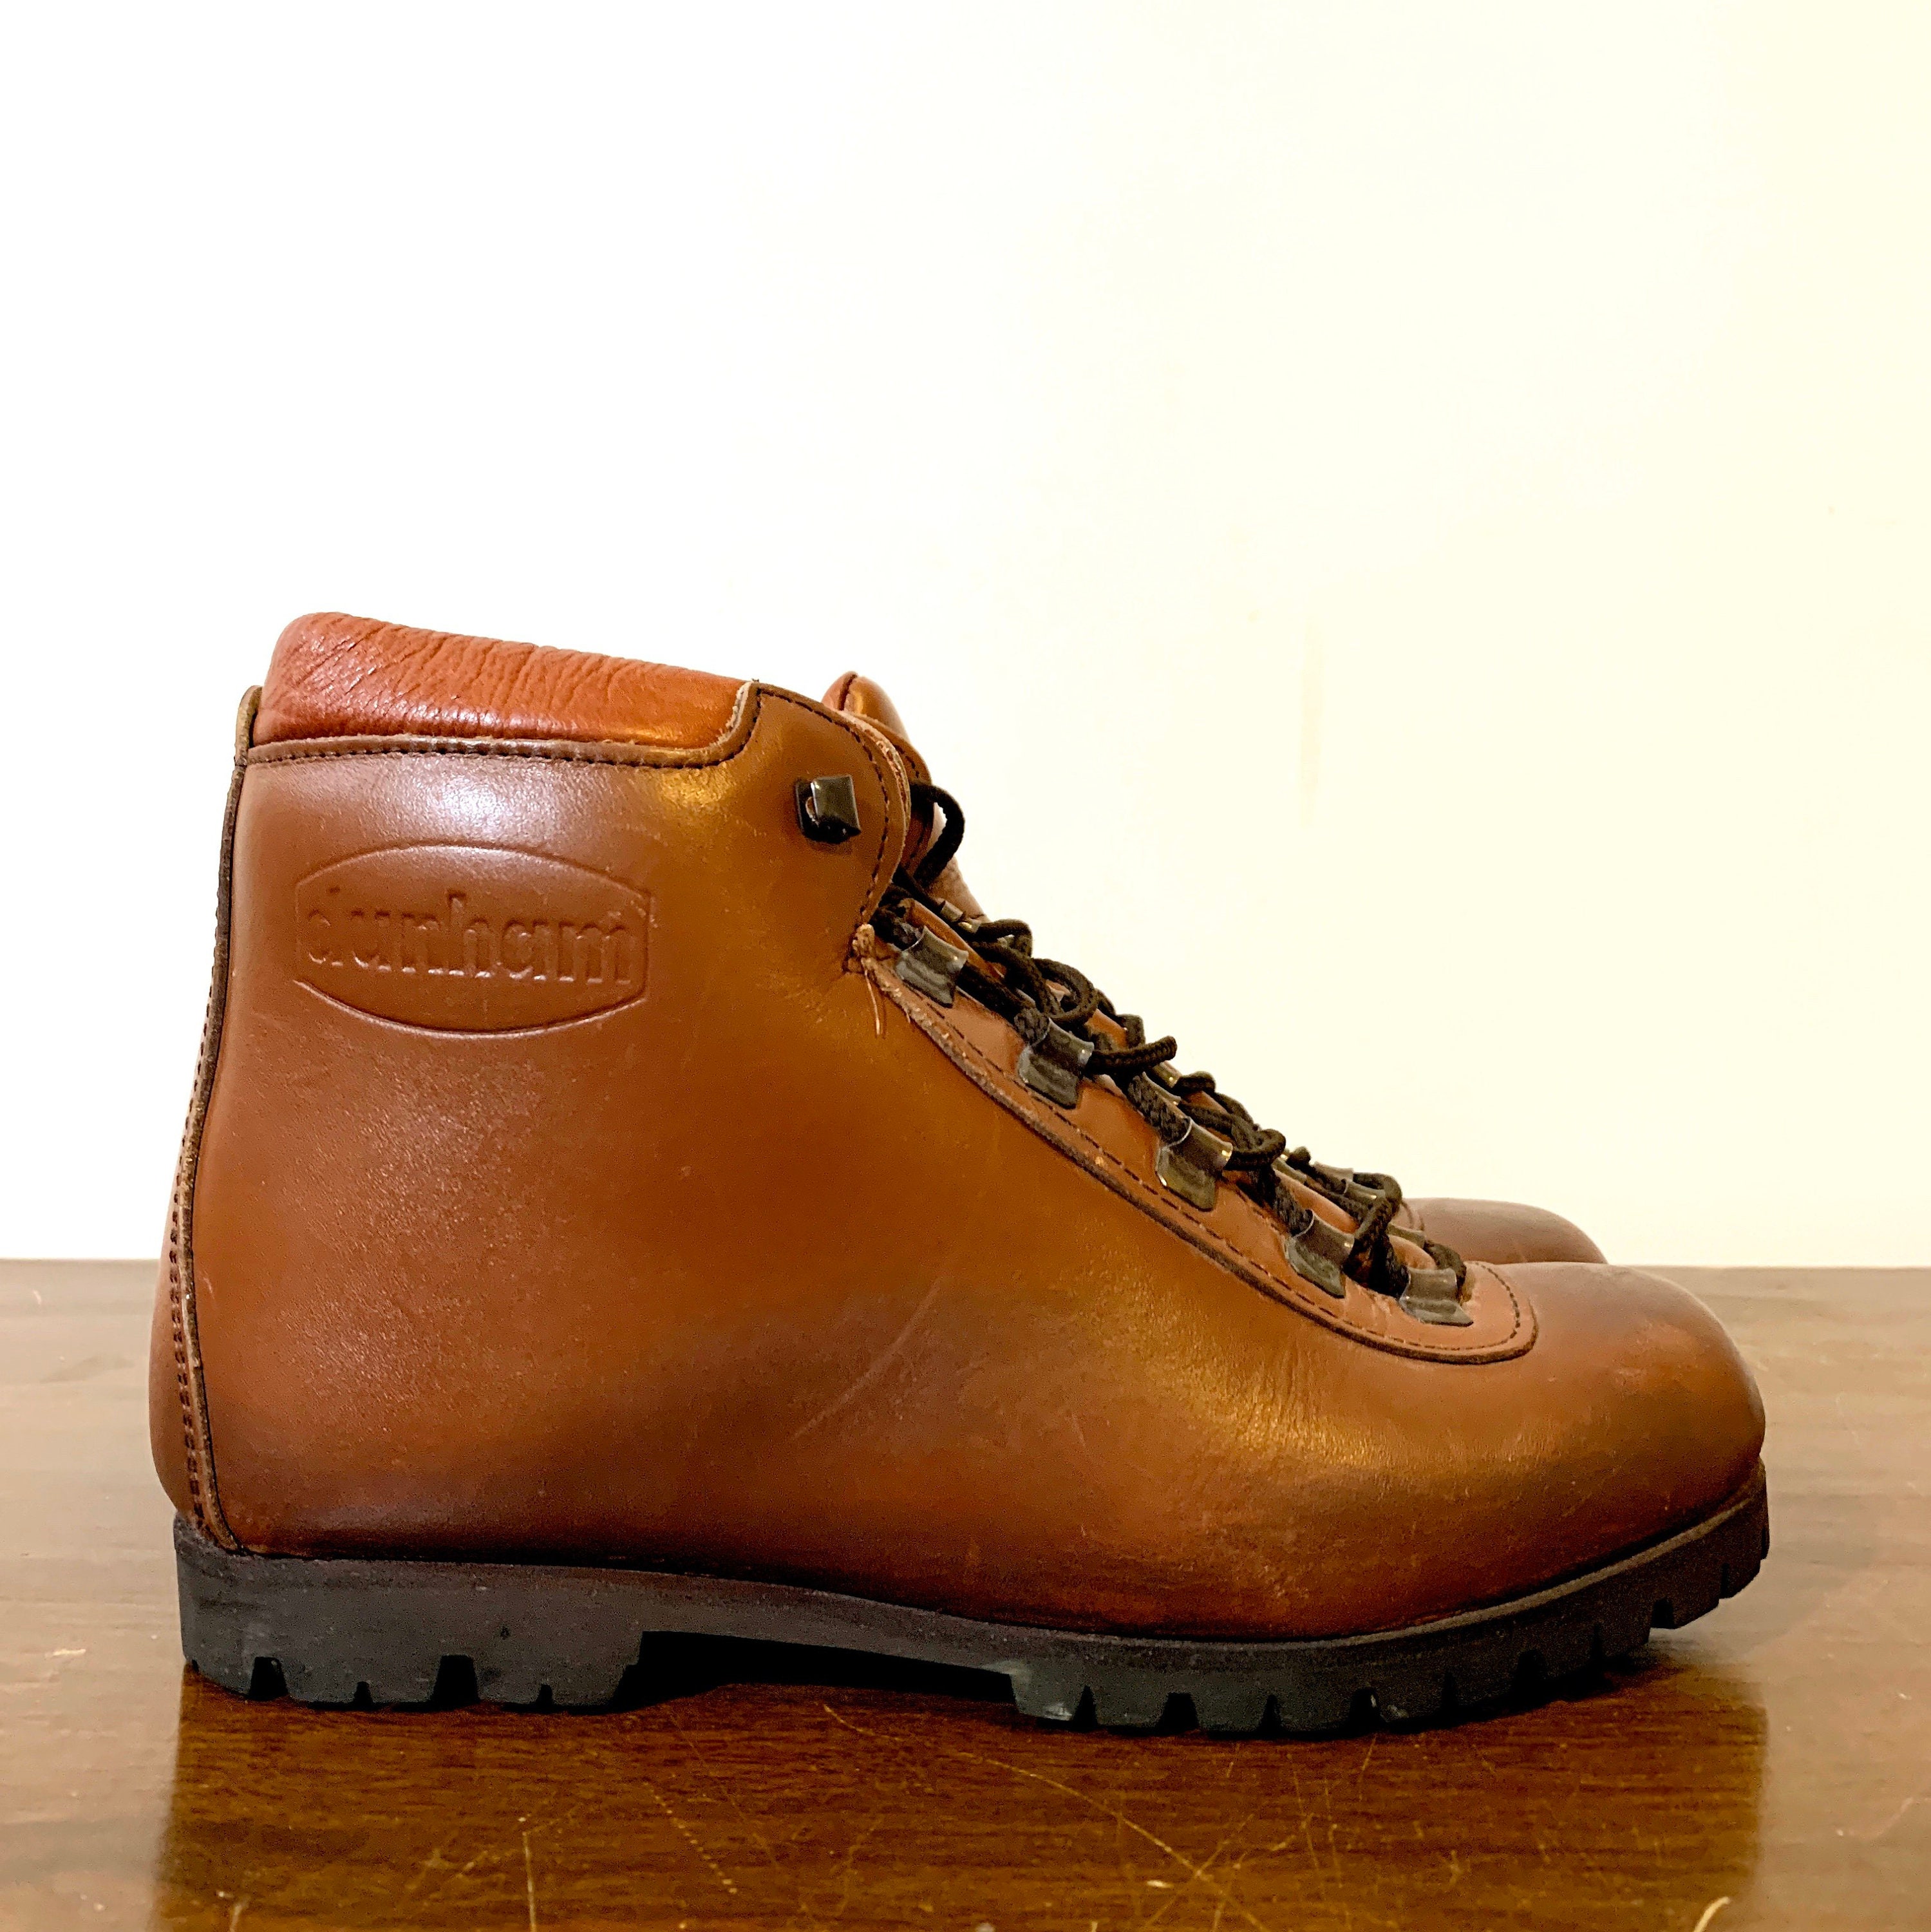 Vintage Dunham Tyroleans Blue Matte Leather Italian Ankle Hiking Boots ...